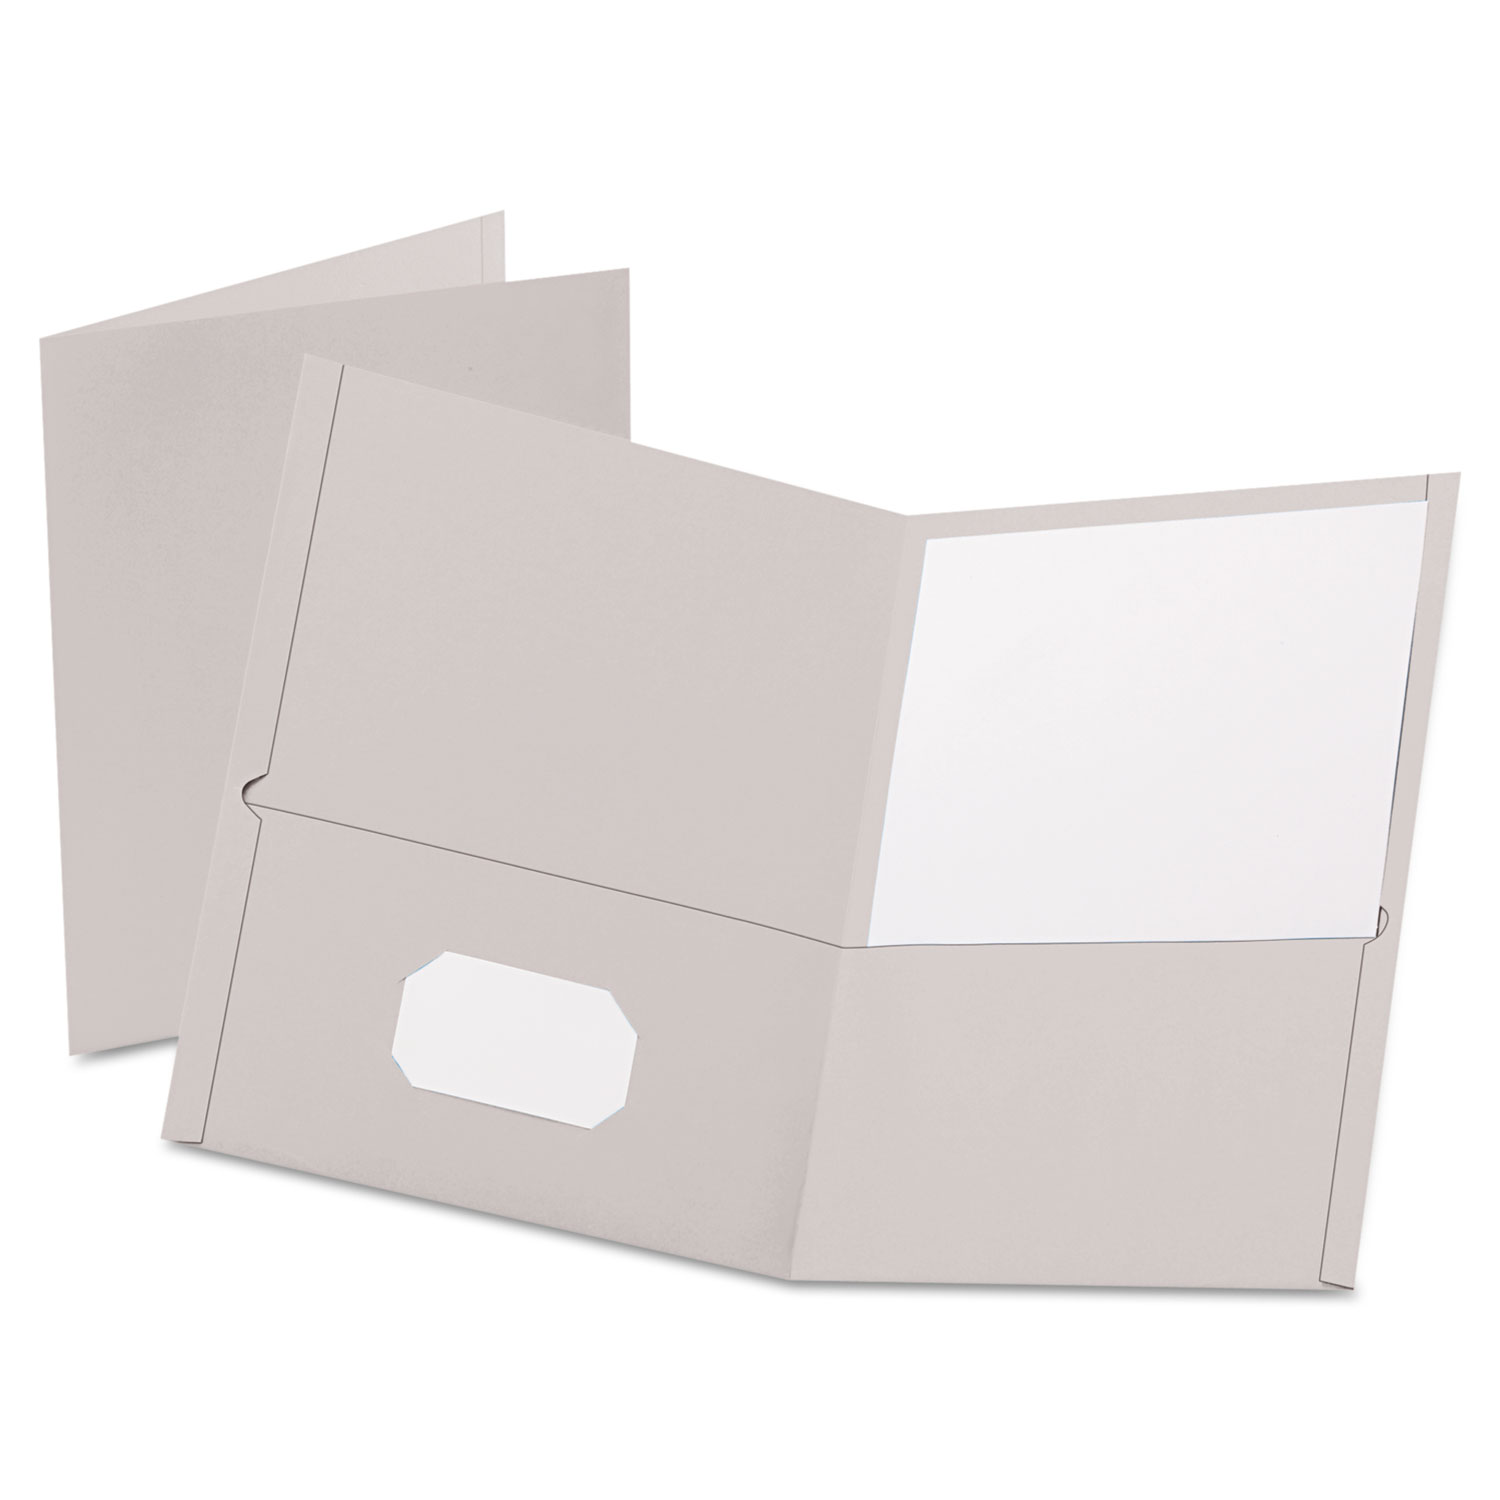  Oxford 57505EE Twin-Pocket Folder, Embossed Leather Grain Paper, Gray, 25/Box (OXF57505) 